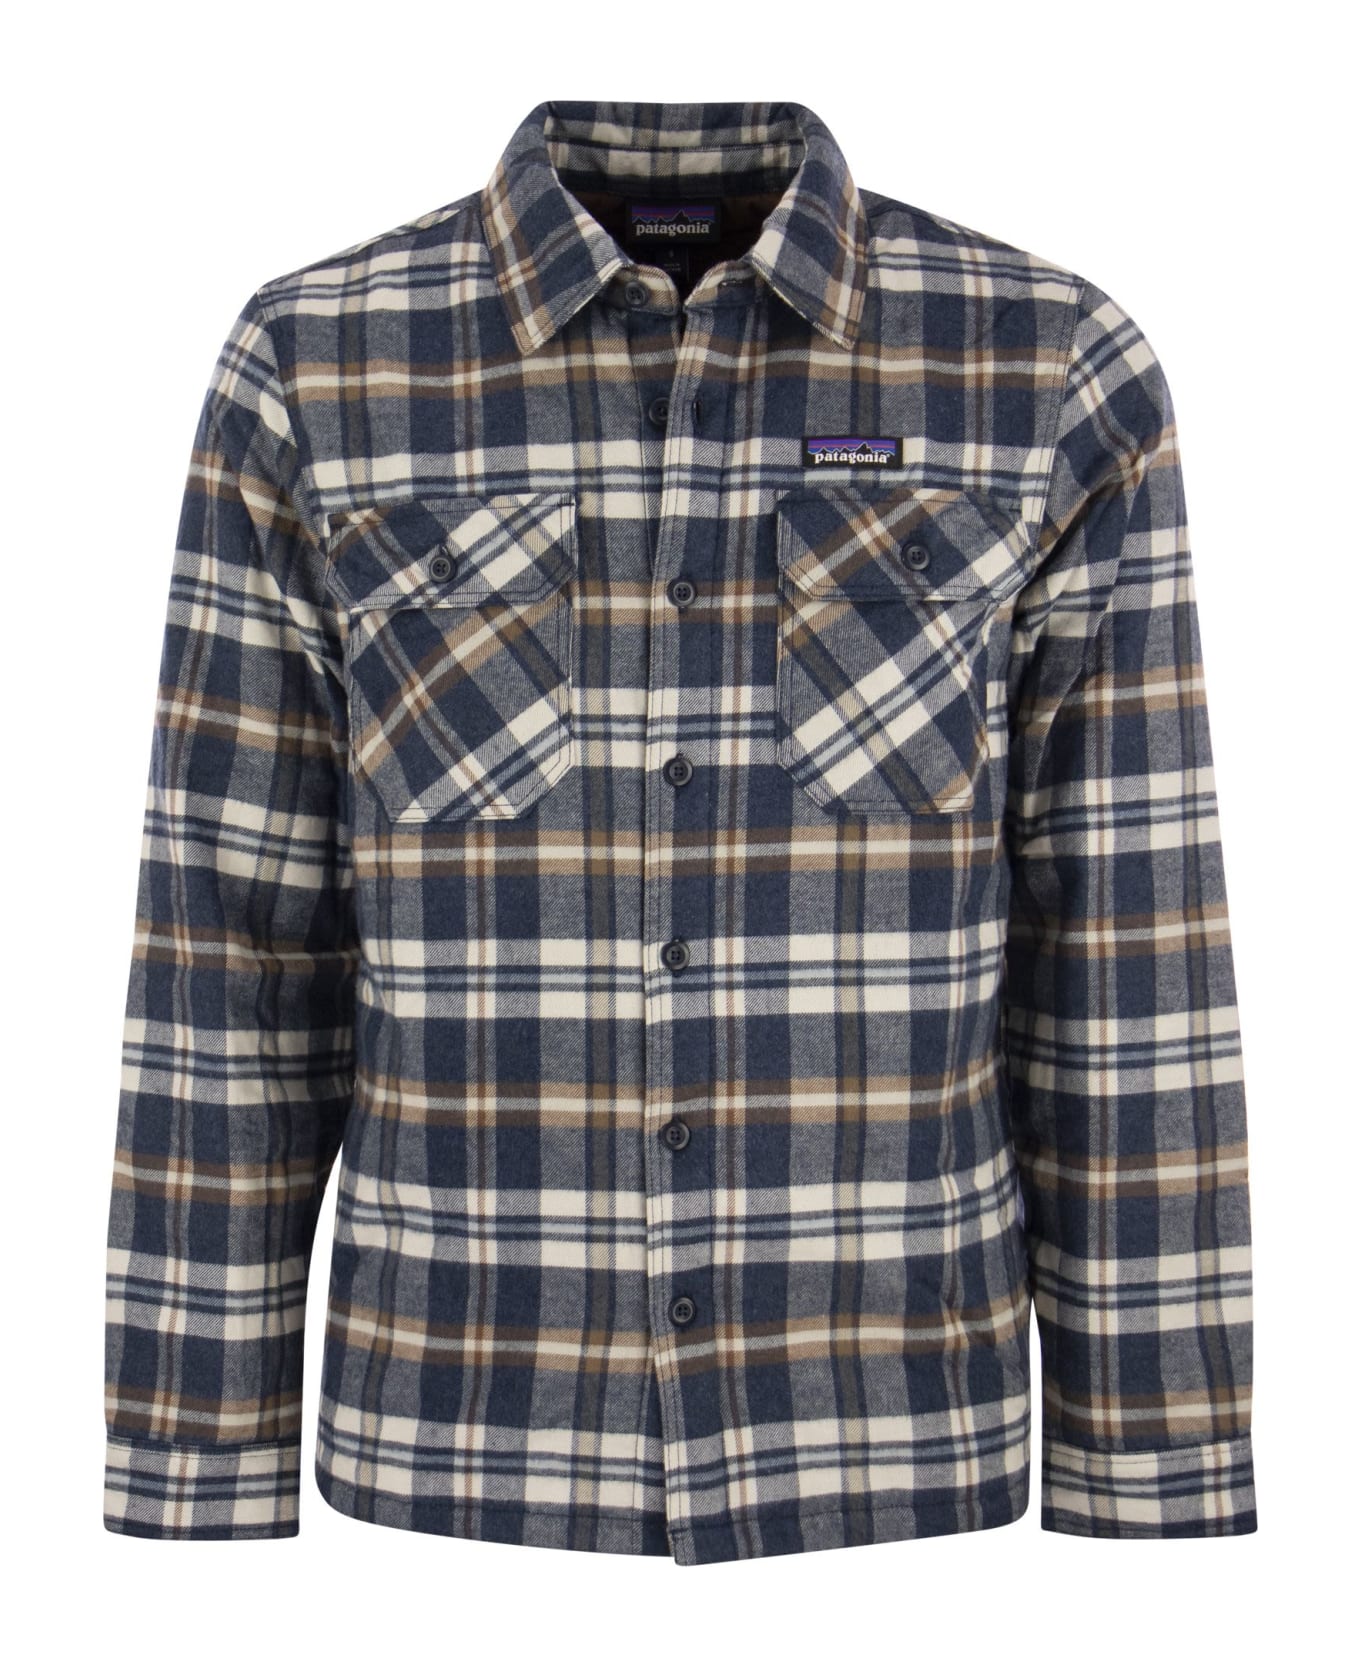 Patagonia Medium Weight Organic Cotton Insulated Flannel Shirt Fjord - Navy